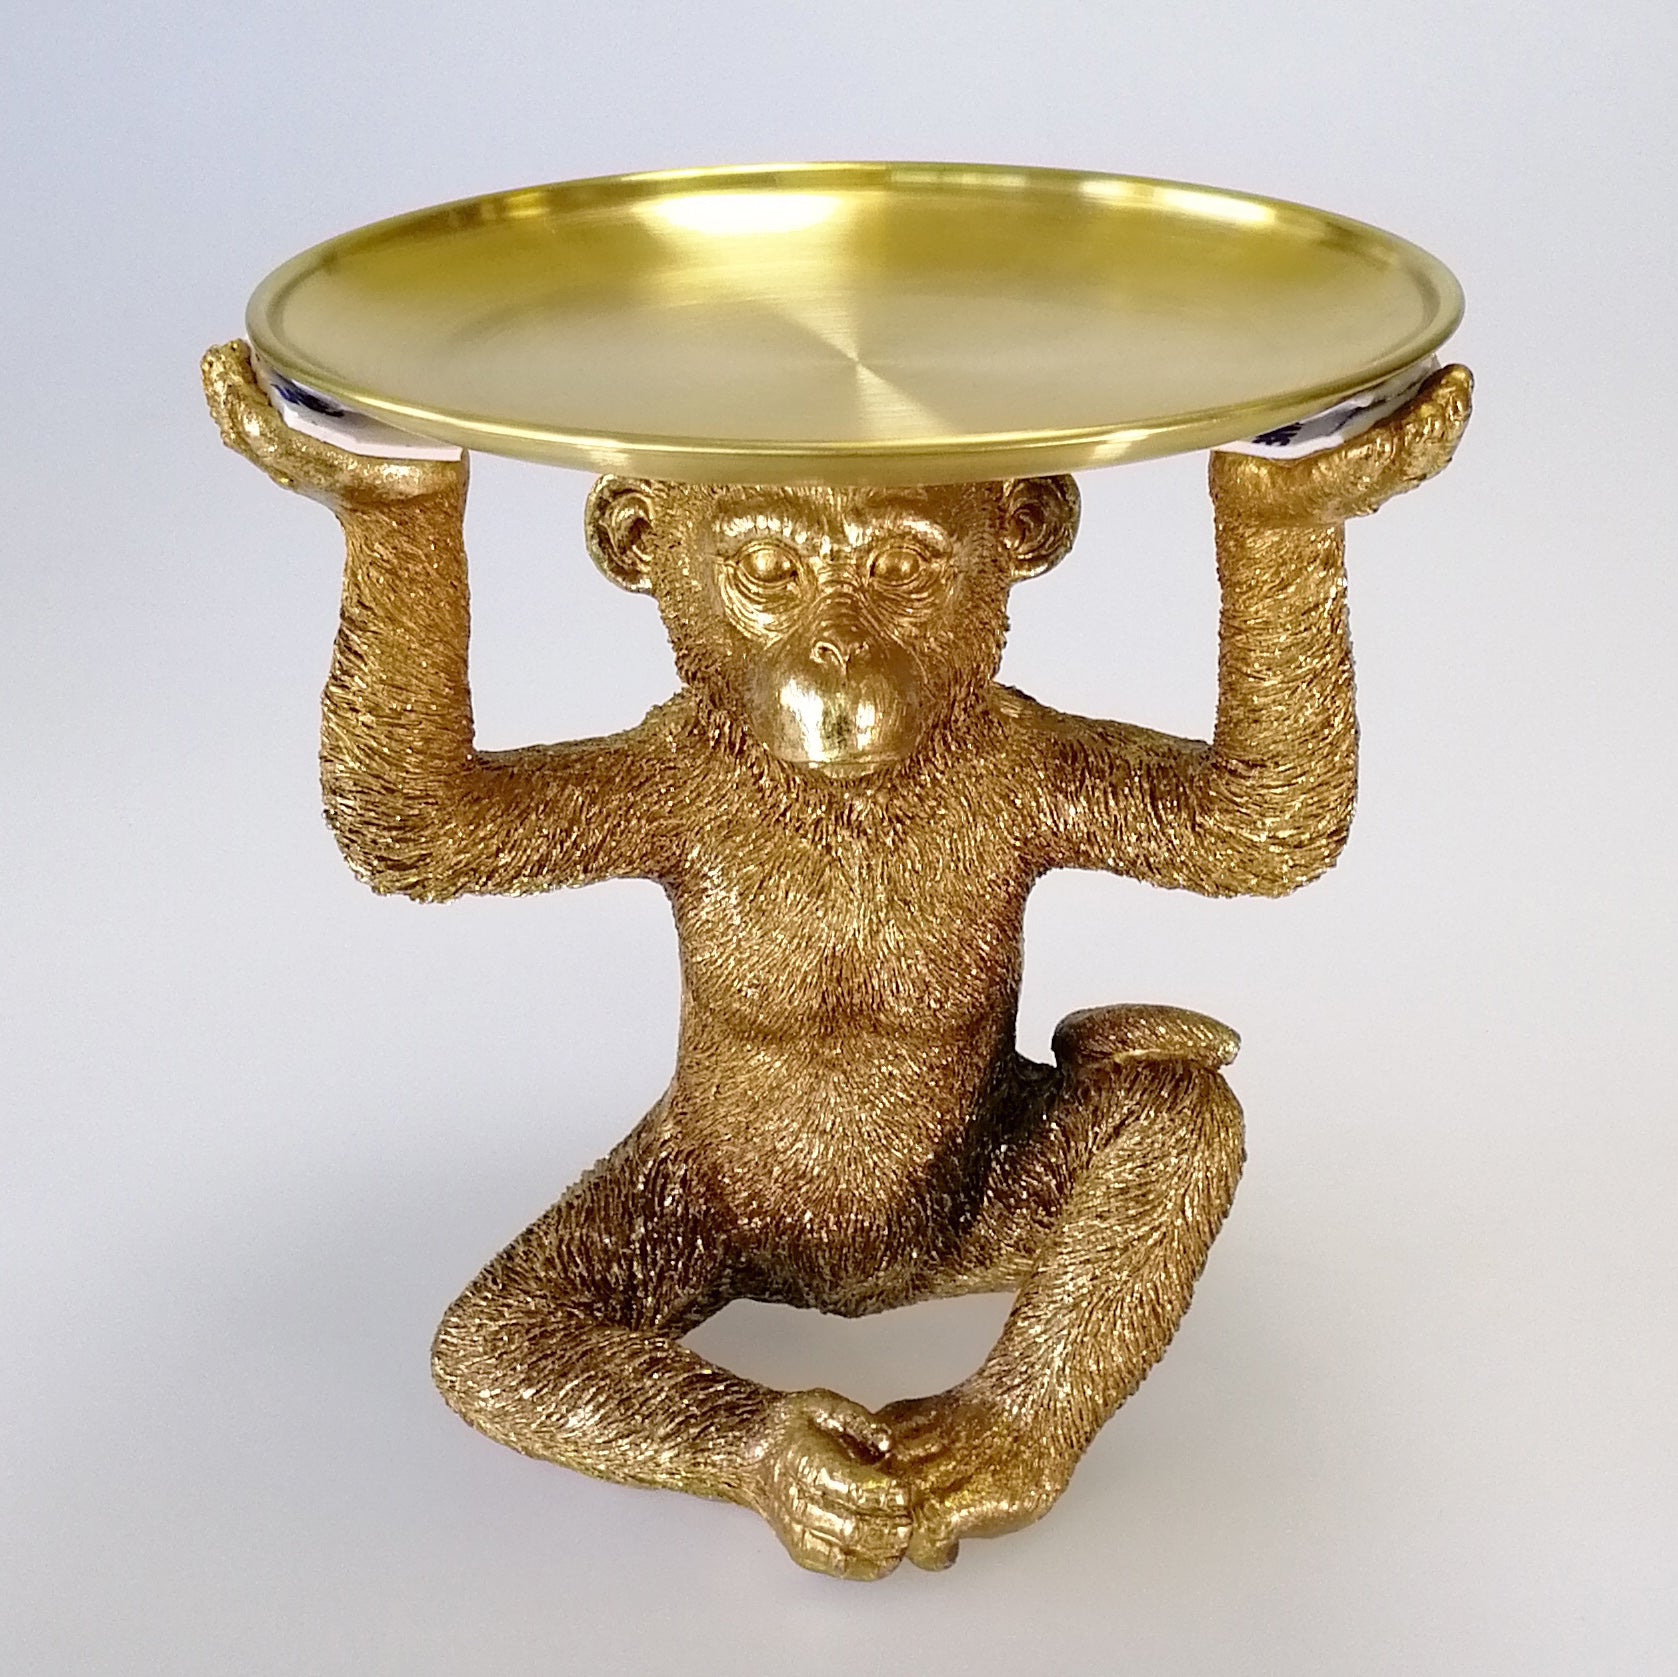 Painted Gold Monkey & Gold Tray